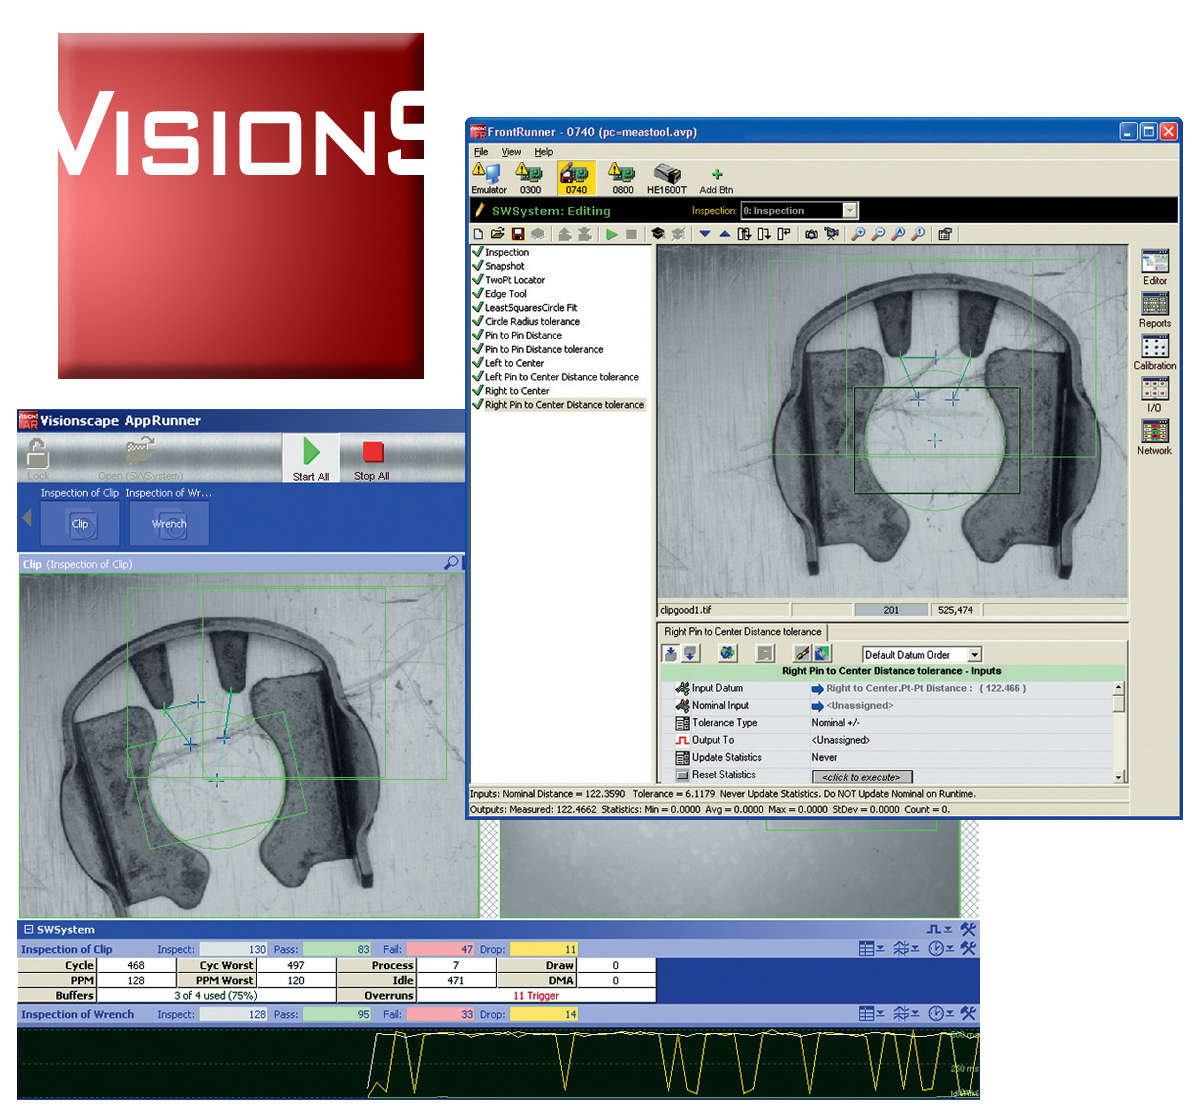 Microscan’s Visionscape® is a comprehensive machine vision software that can be used on machine vision boards, GigE solutions, and smart cameras